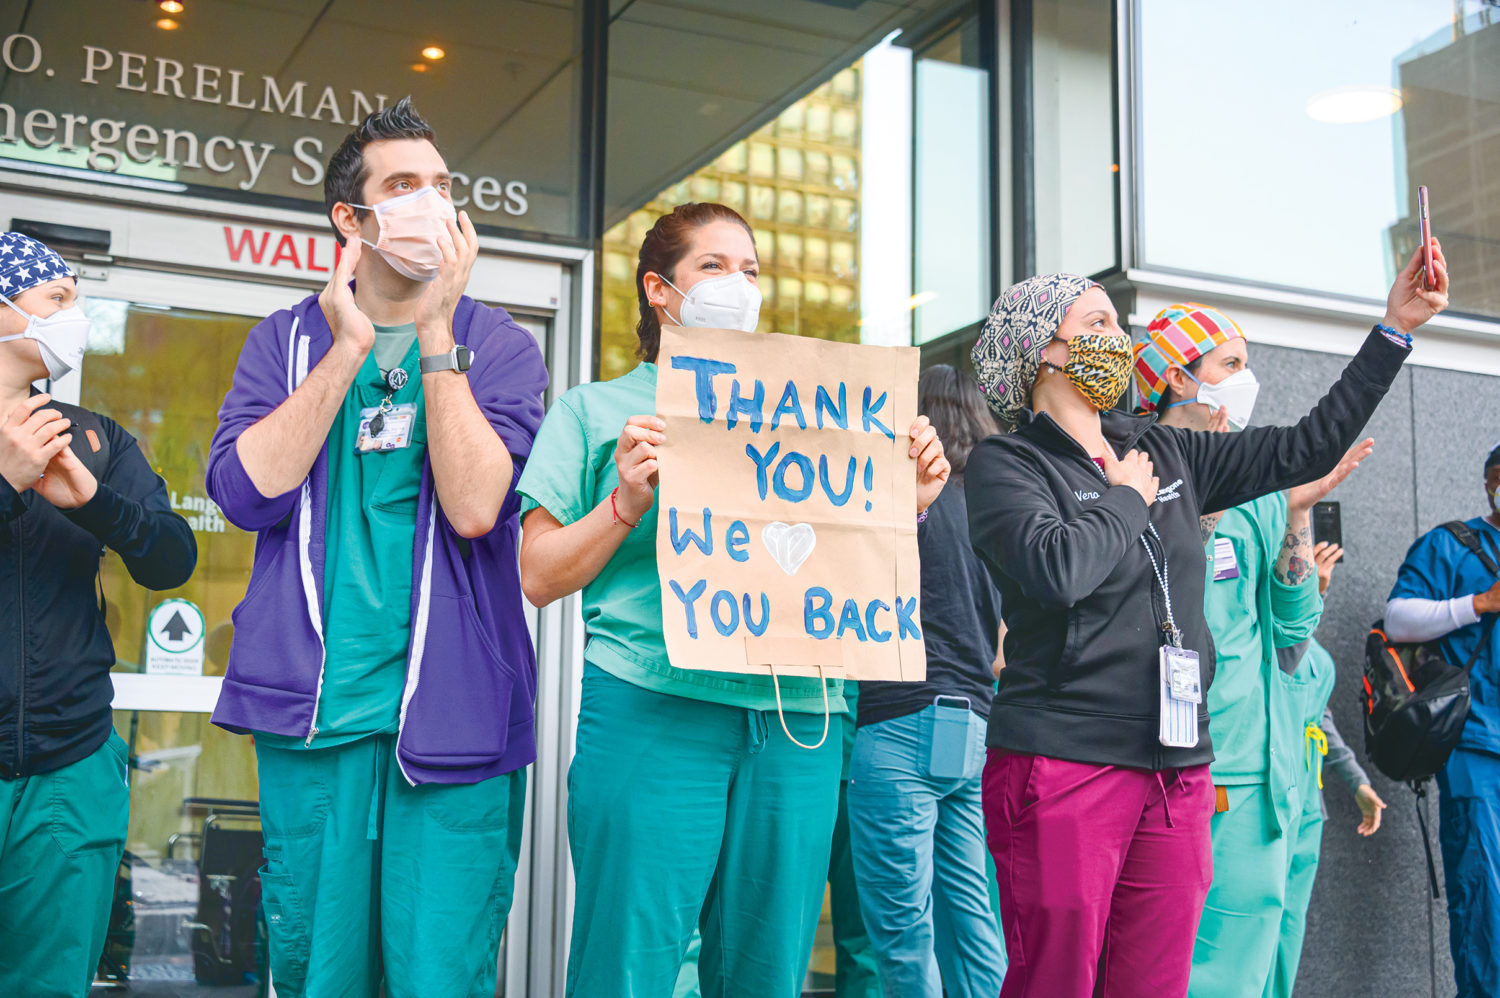 NEW YORK, NEW YORK - MAY 01: Medical workers hold a thank you sign outside NYU Langone Health hospital as people applaud to show their gratitude to medical staff and essential workers during the coronavirus pandemic on May 1, 2020 in New York City. COVID-19 has spread to most countries around the world, claiming over 239,000 lives with over 3.4 million infections reported. (Photo by Noam Galai/Getty Images)